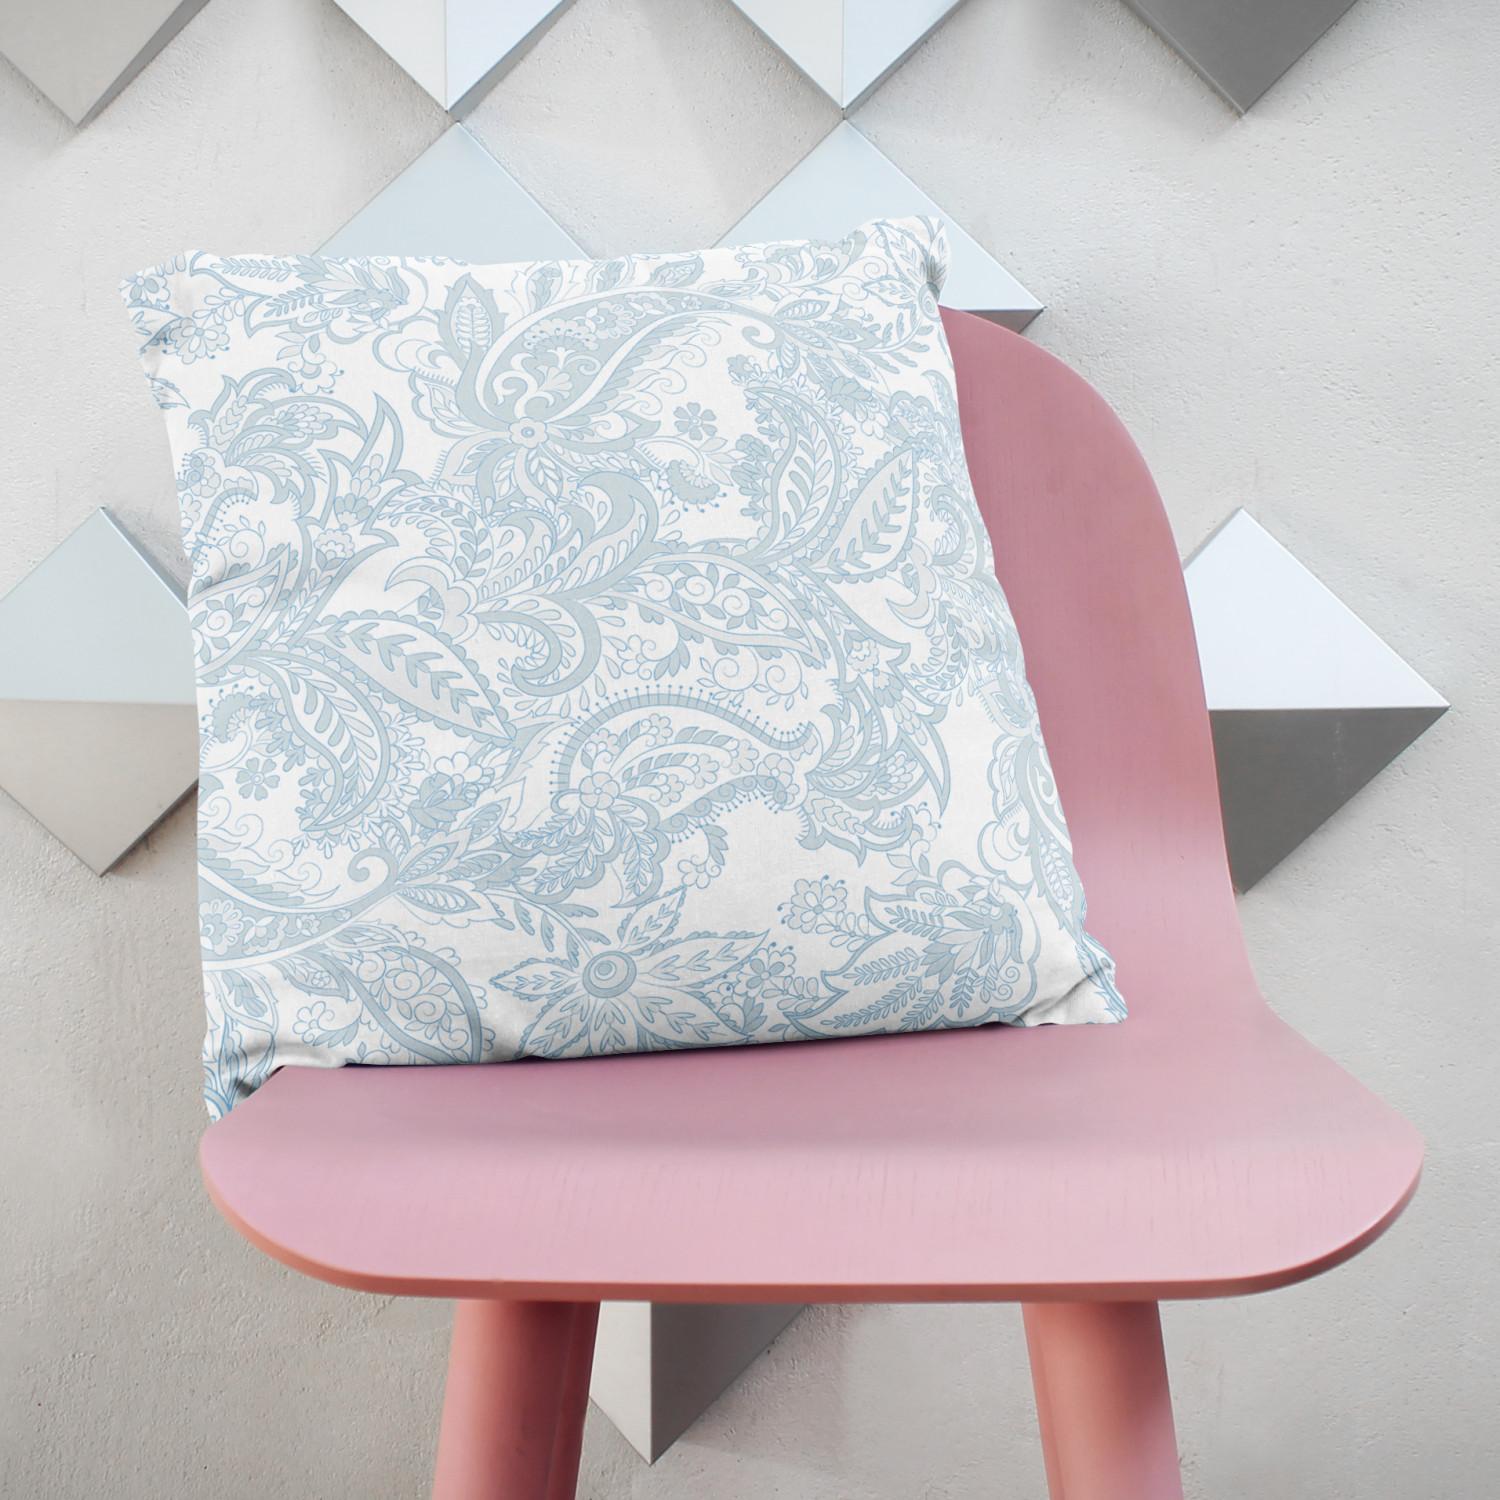 Cojín de microfibra The delicacy of nature - flowers and leaves in white and blue cushions